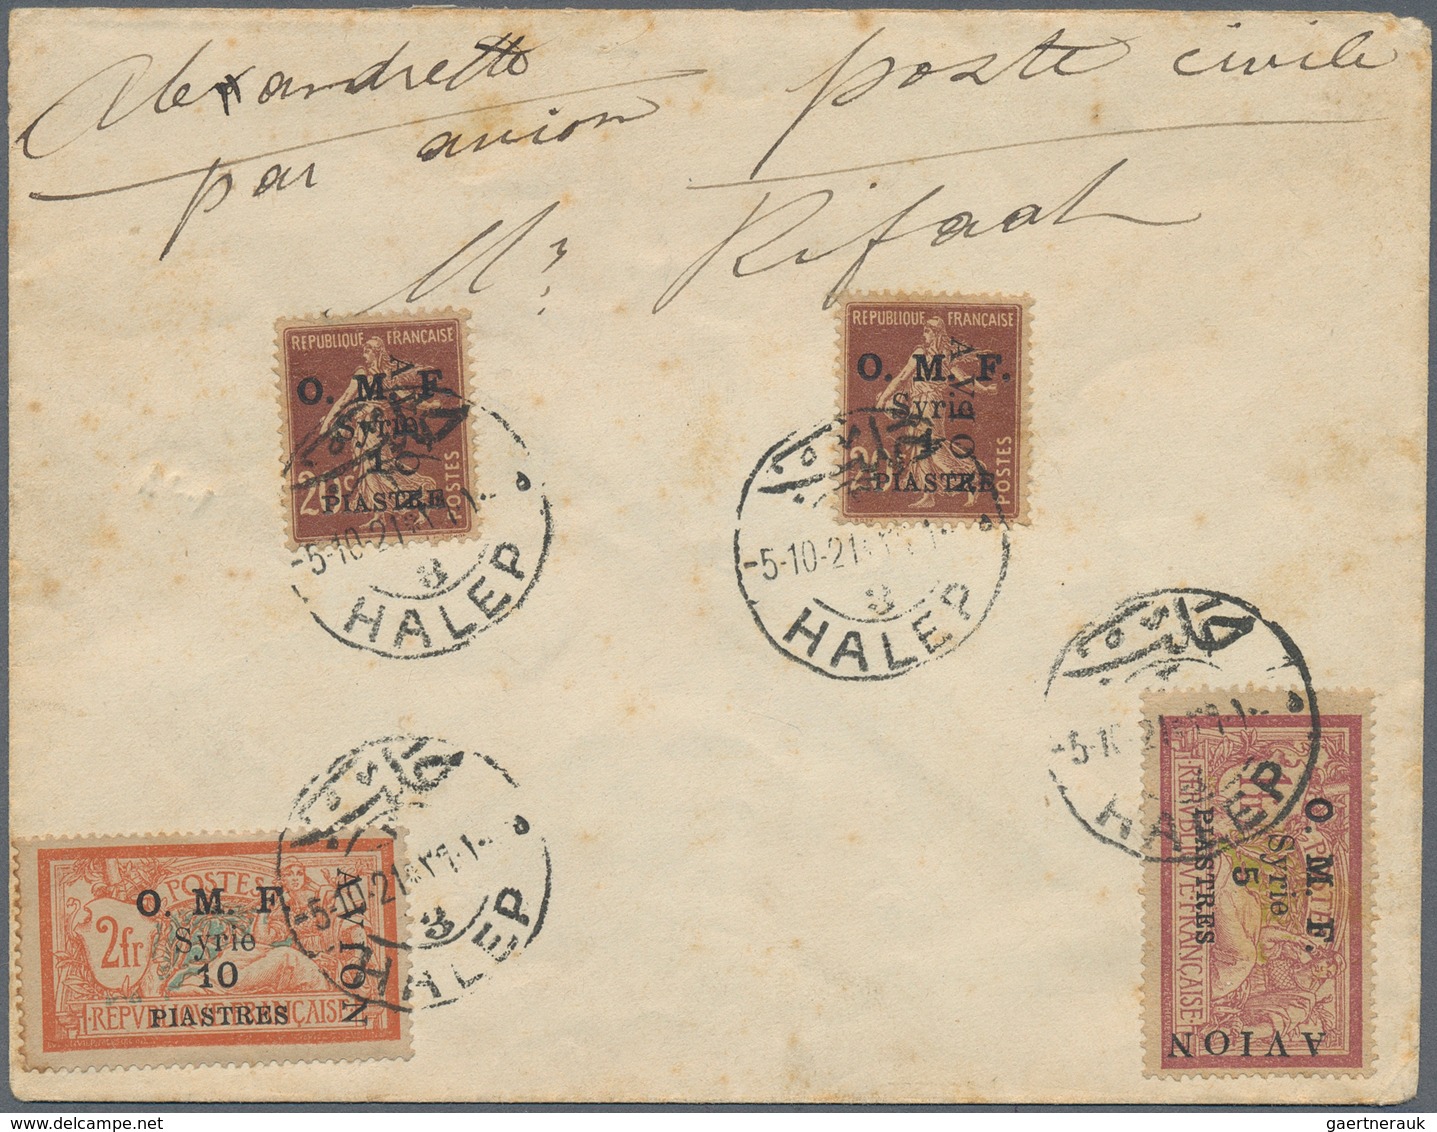 Syrien: 1921, Airmails, Vertical "AVION" Overprints, FIRST DAY COVER (small Faults/min. Toning) Bear - Syrië